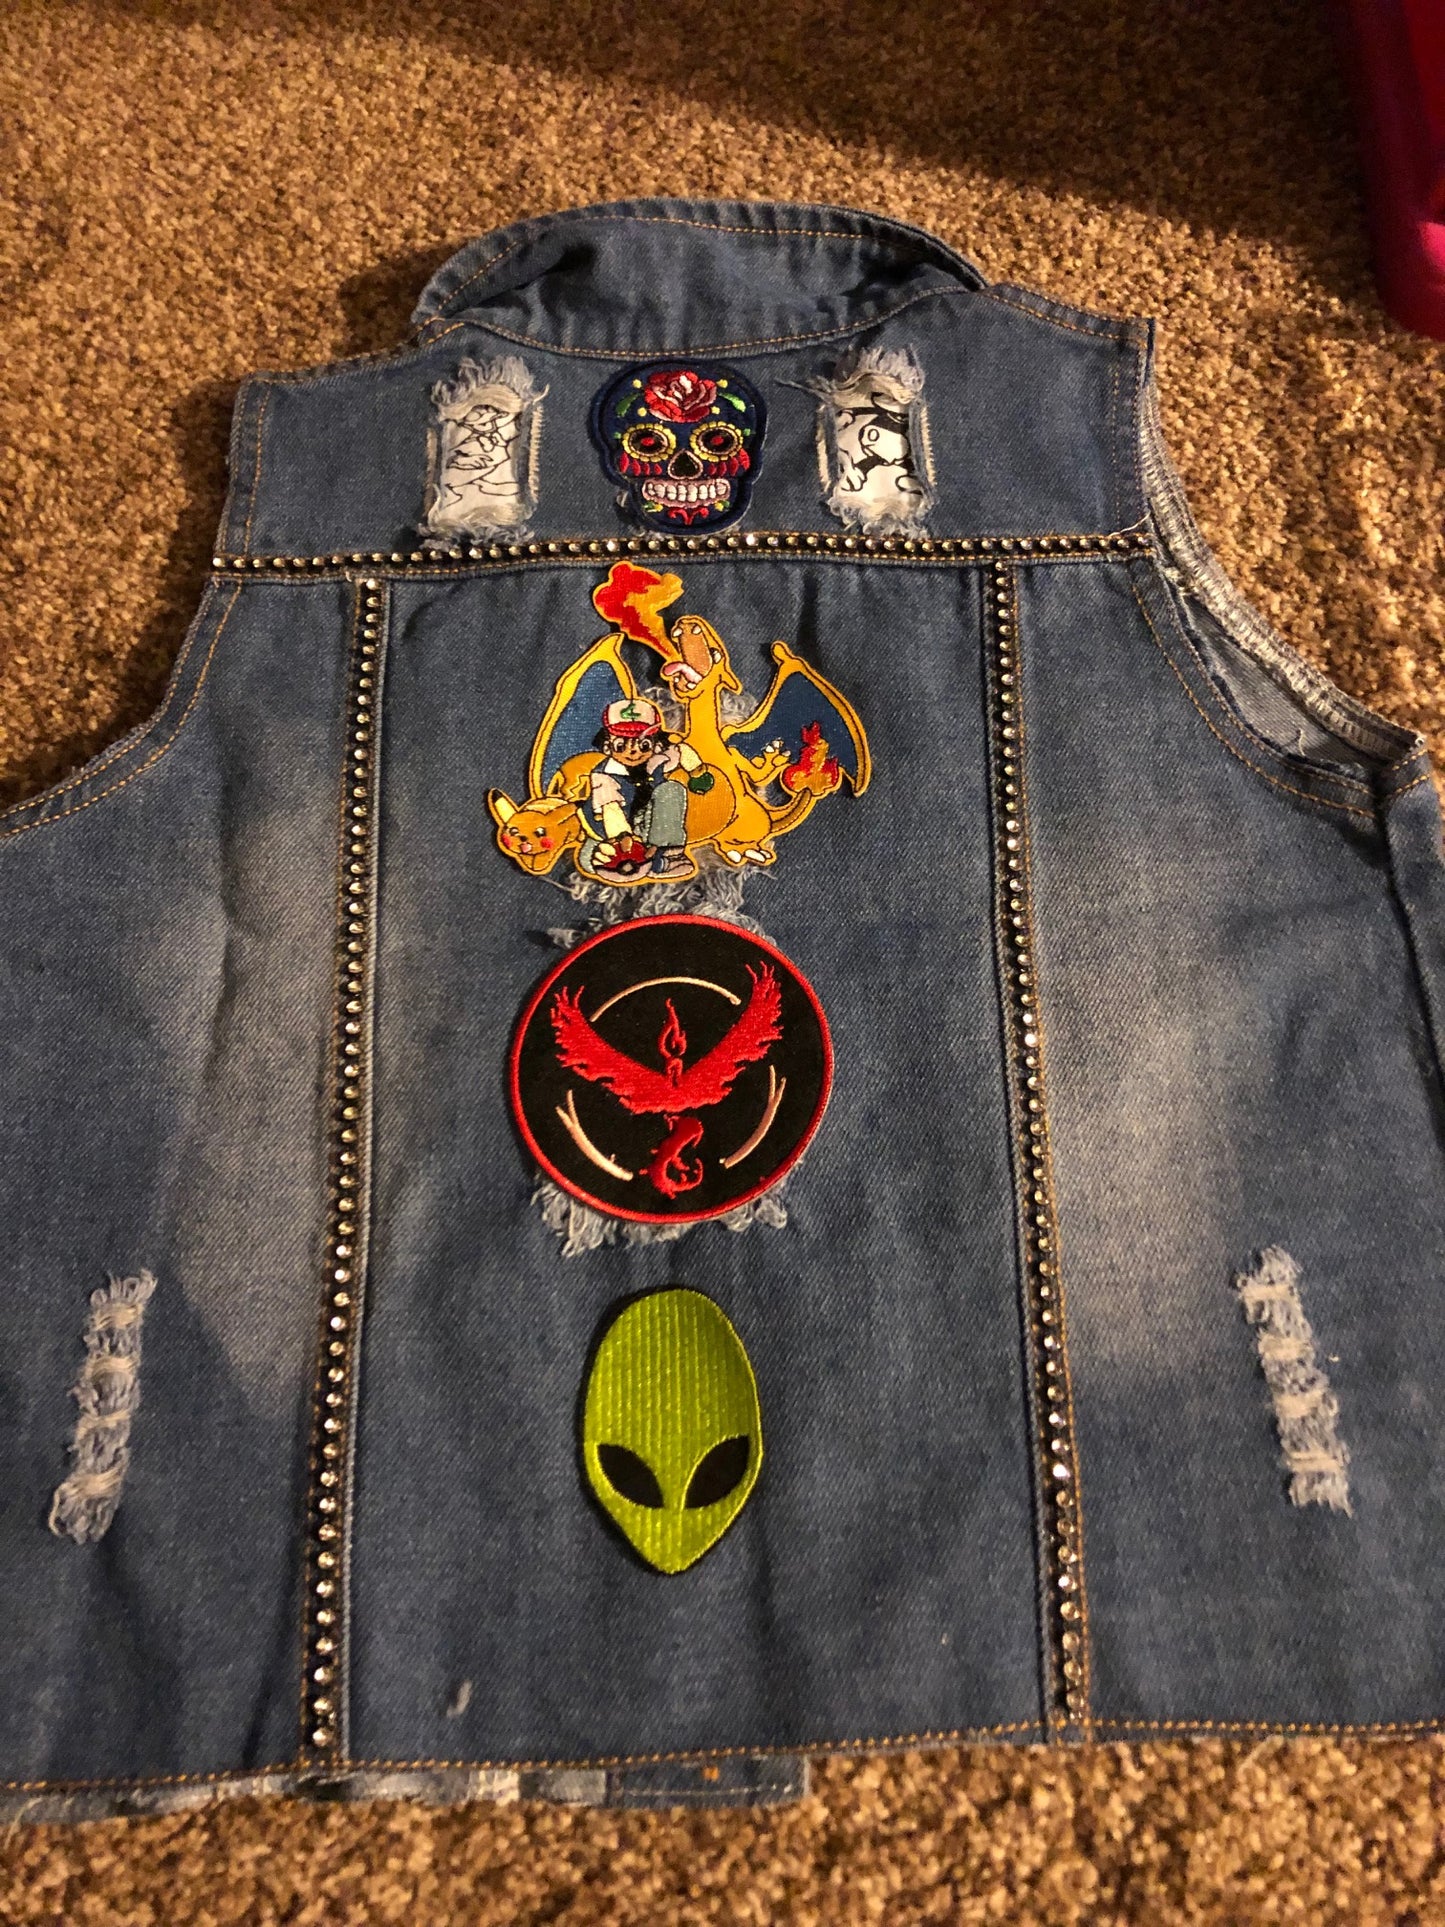 Custom Fully Invested Vest- I dive into all that is your world and customize a vest that represents YOU